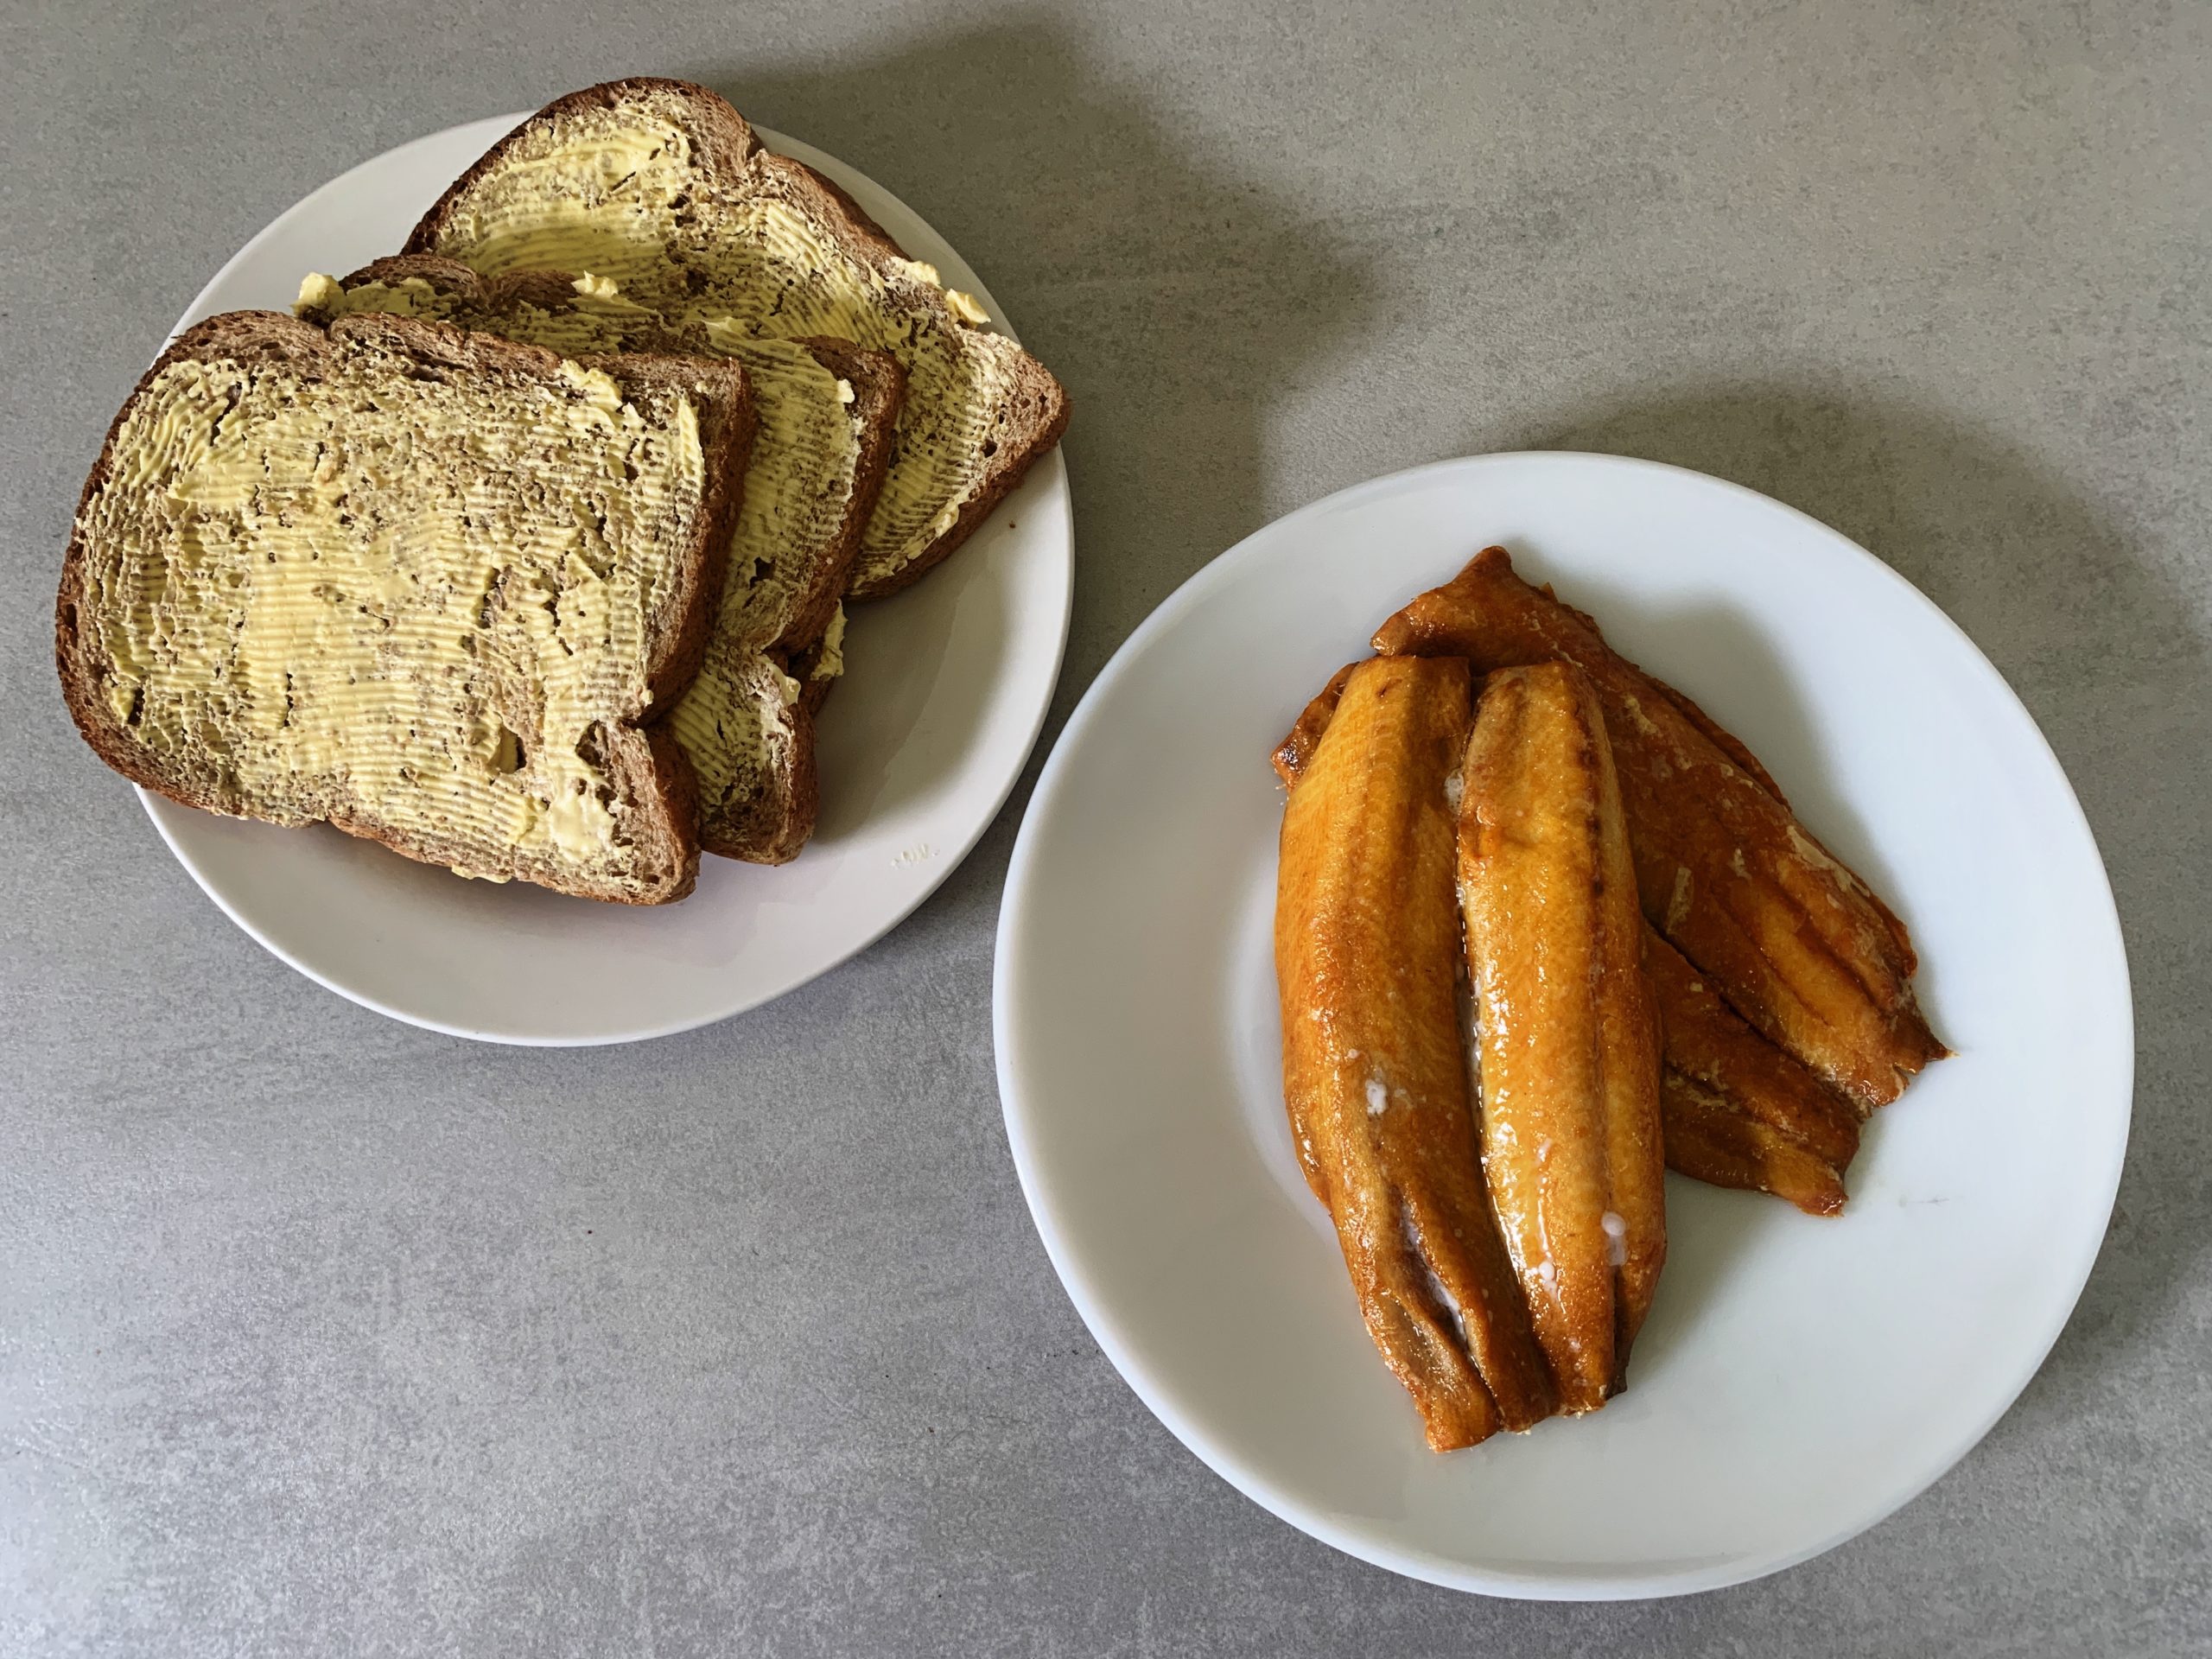 Kippers and brown bread and butter